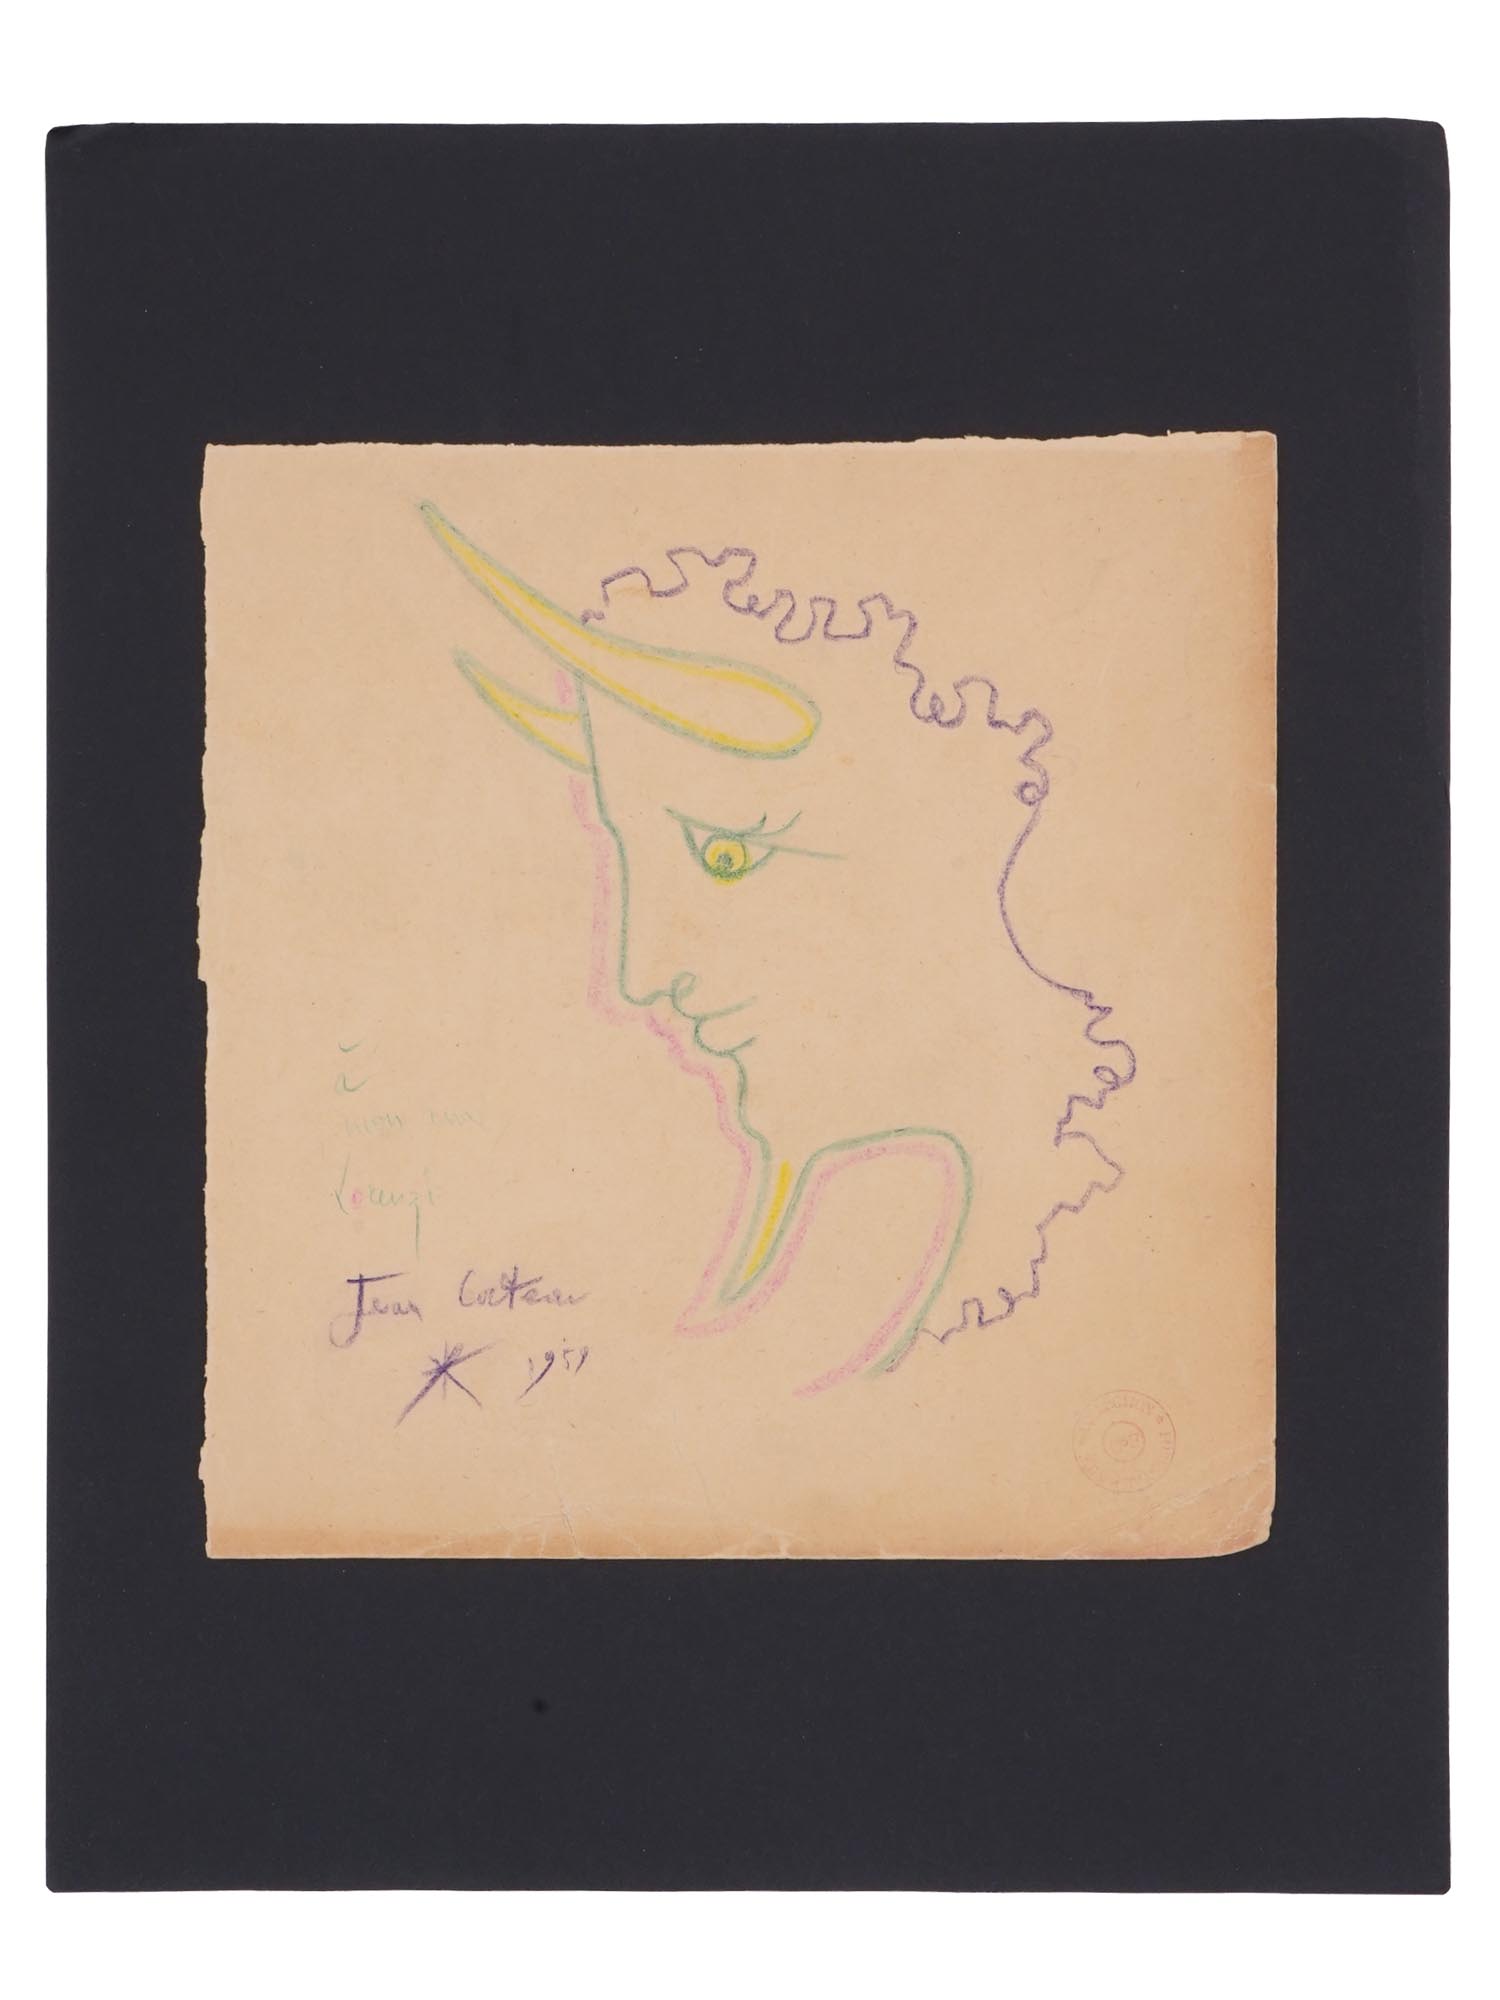 1959 PENCIL DRAWING WITH DEDICATION BY JEAN COCTEAU PIC-0